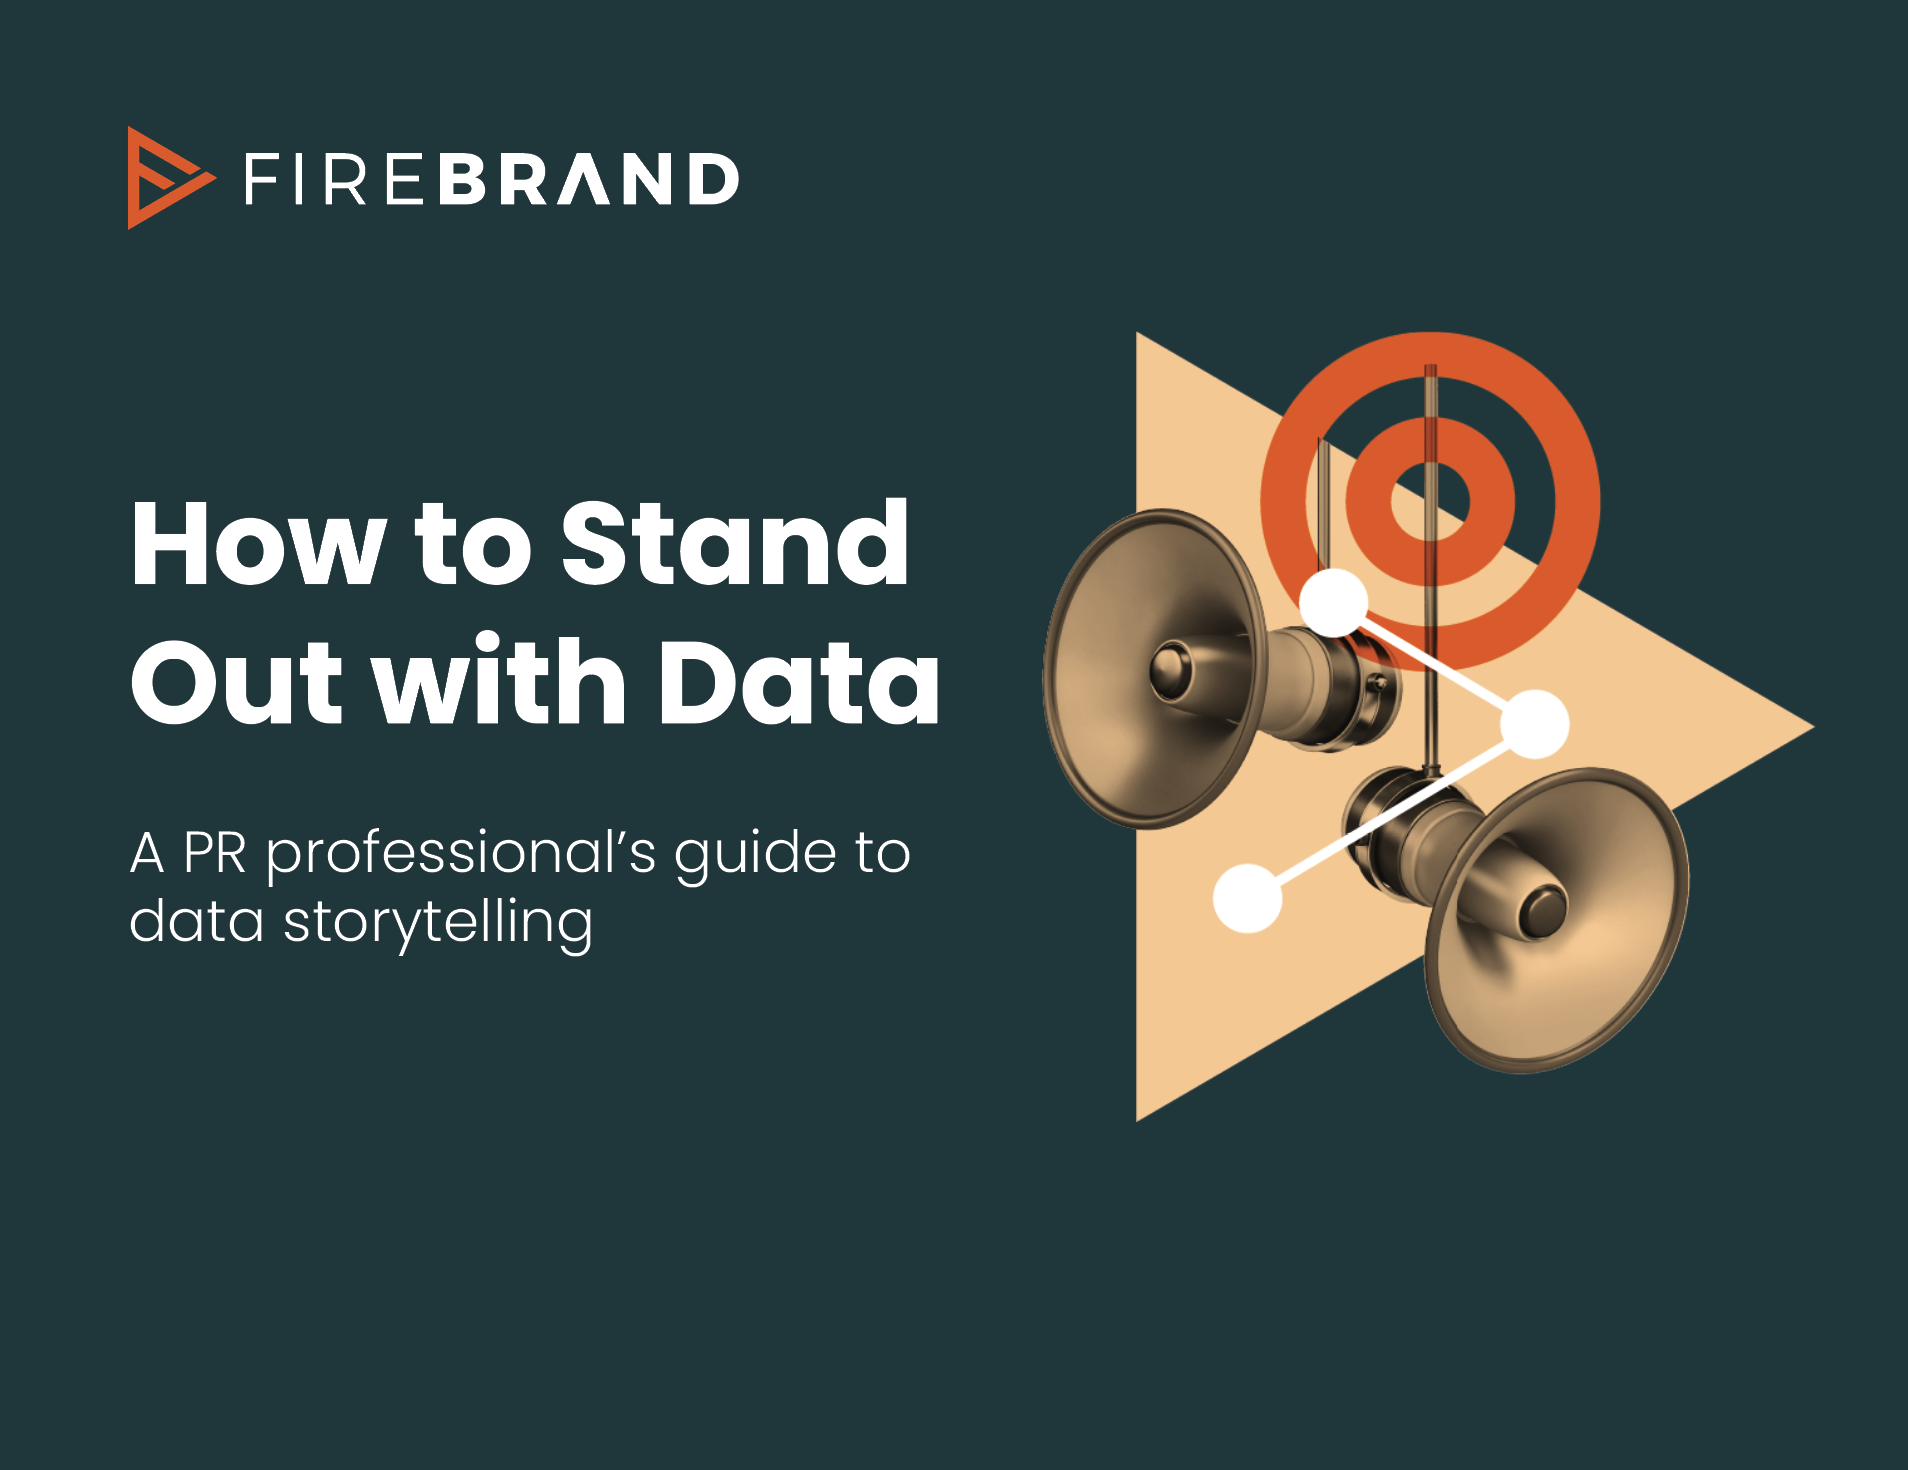 Firebrand: How to Stand Out with Data. Ebook